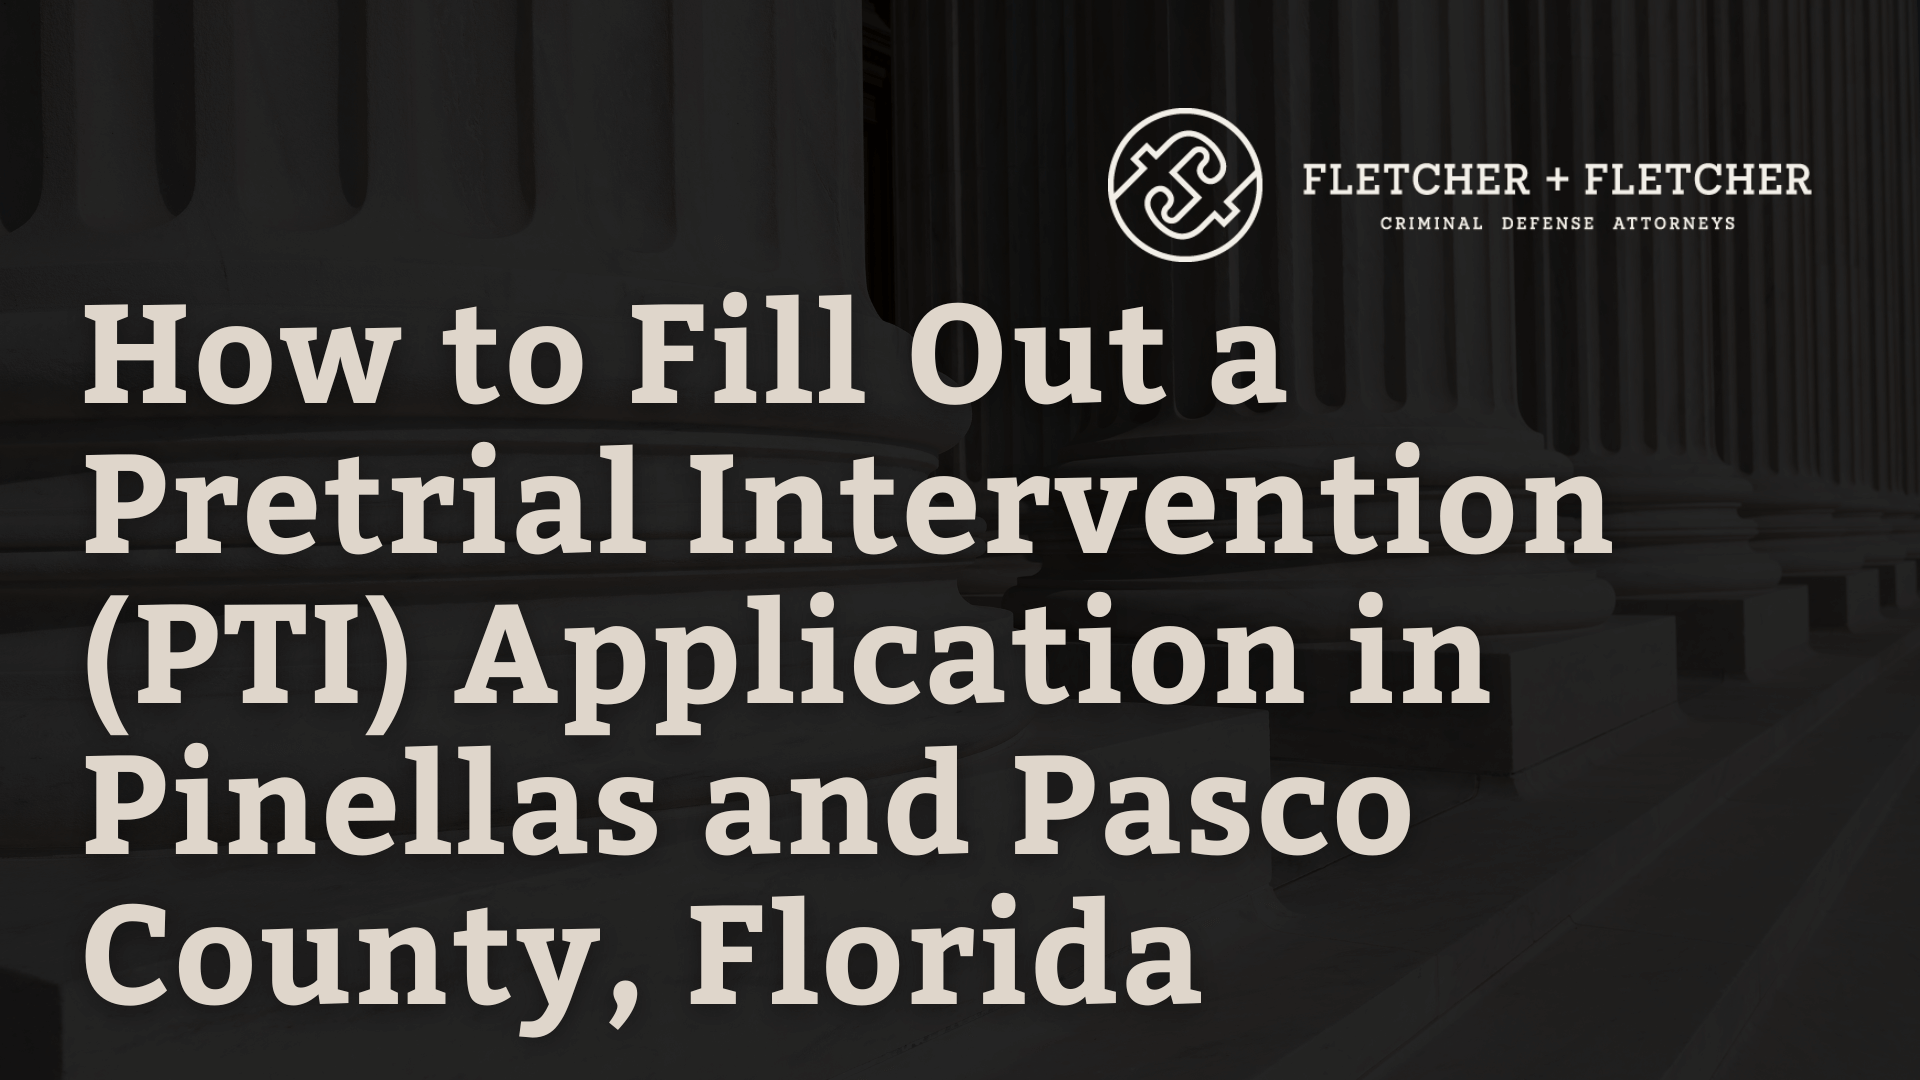 How to Fill Out a Pretrial Intervention (PTI) Application in Pinellas and Pasco County, Florida